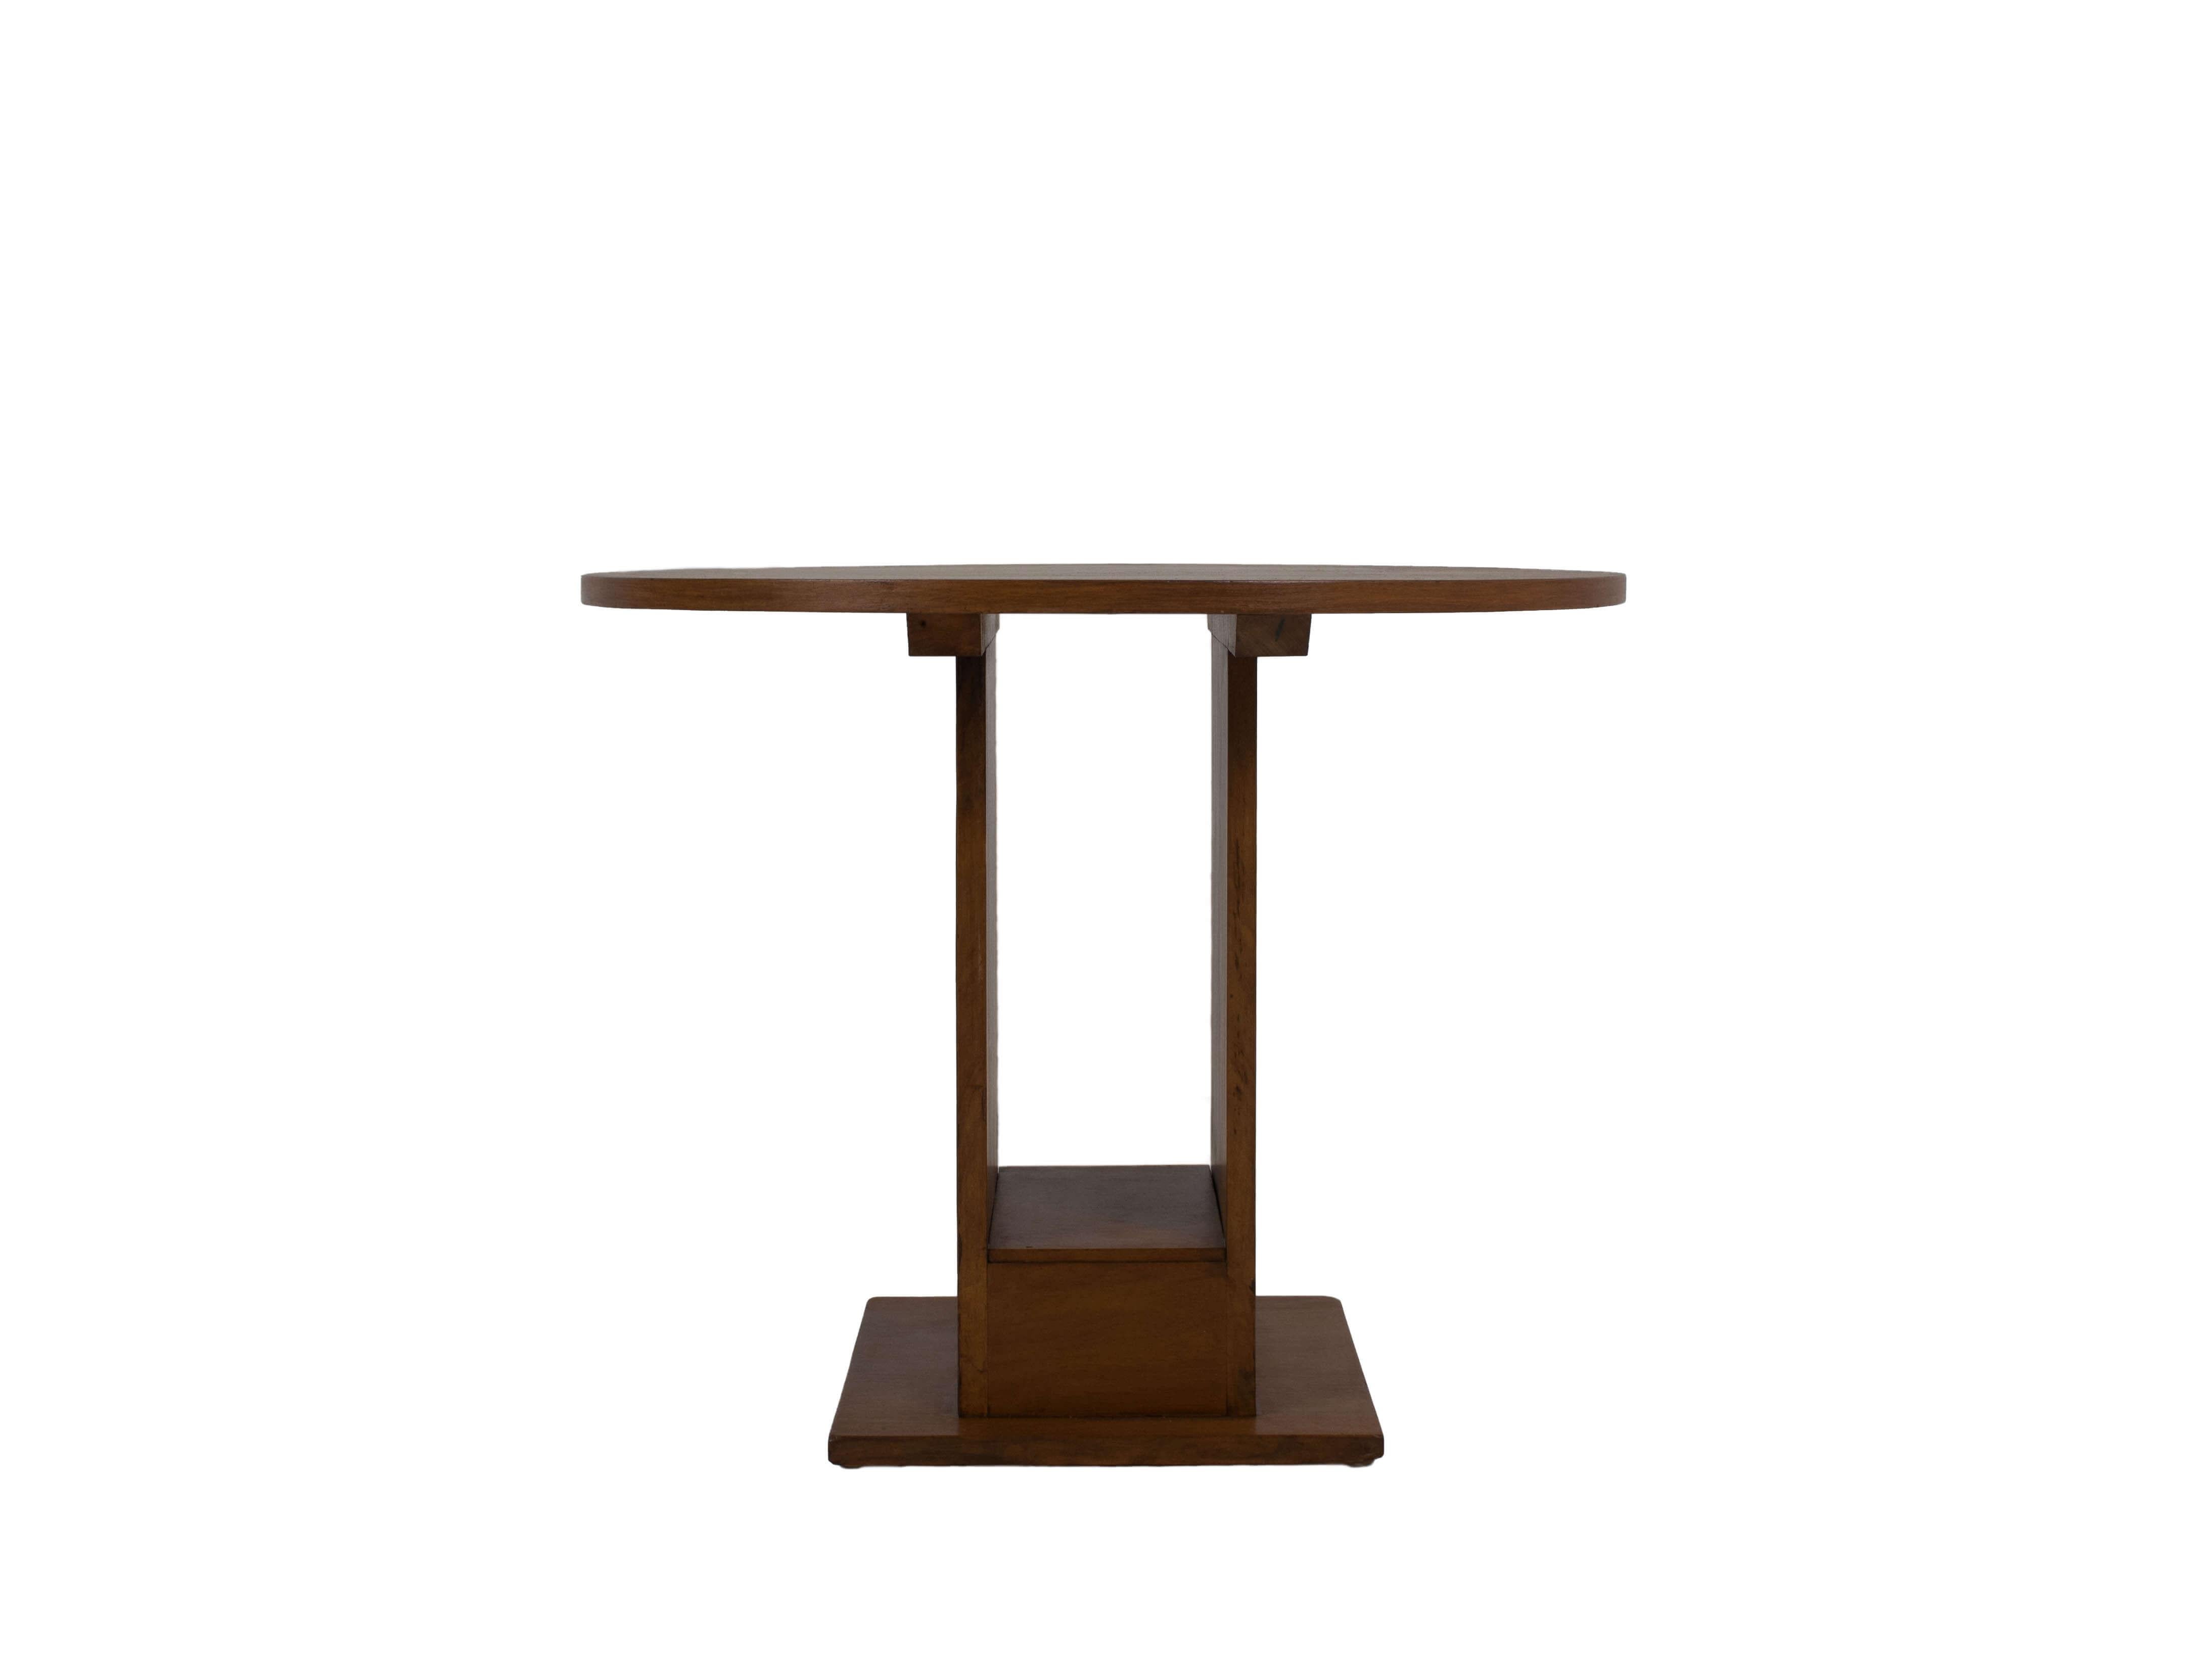 Nice The Hague School sidetable, potentially by Anton Lucas. This Art Deco table is charming by its simplicity. The combination of the square foot with two angles; one see-through and one solid, makes this a very interesting table. It is in good